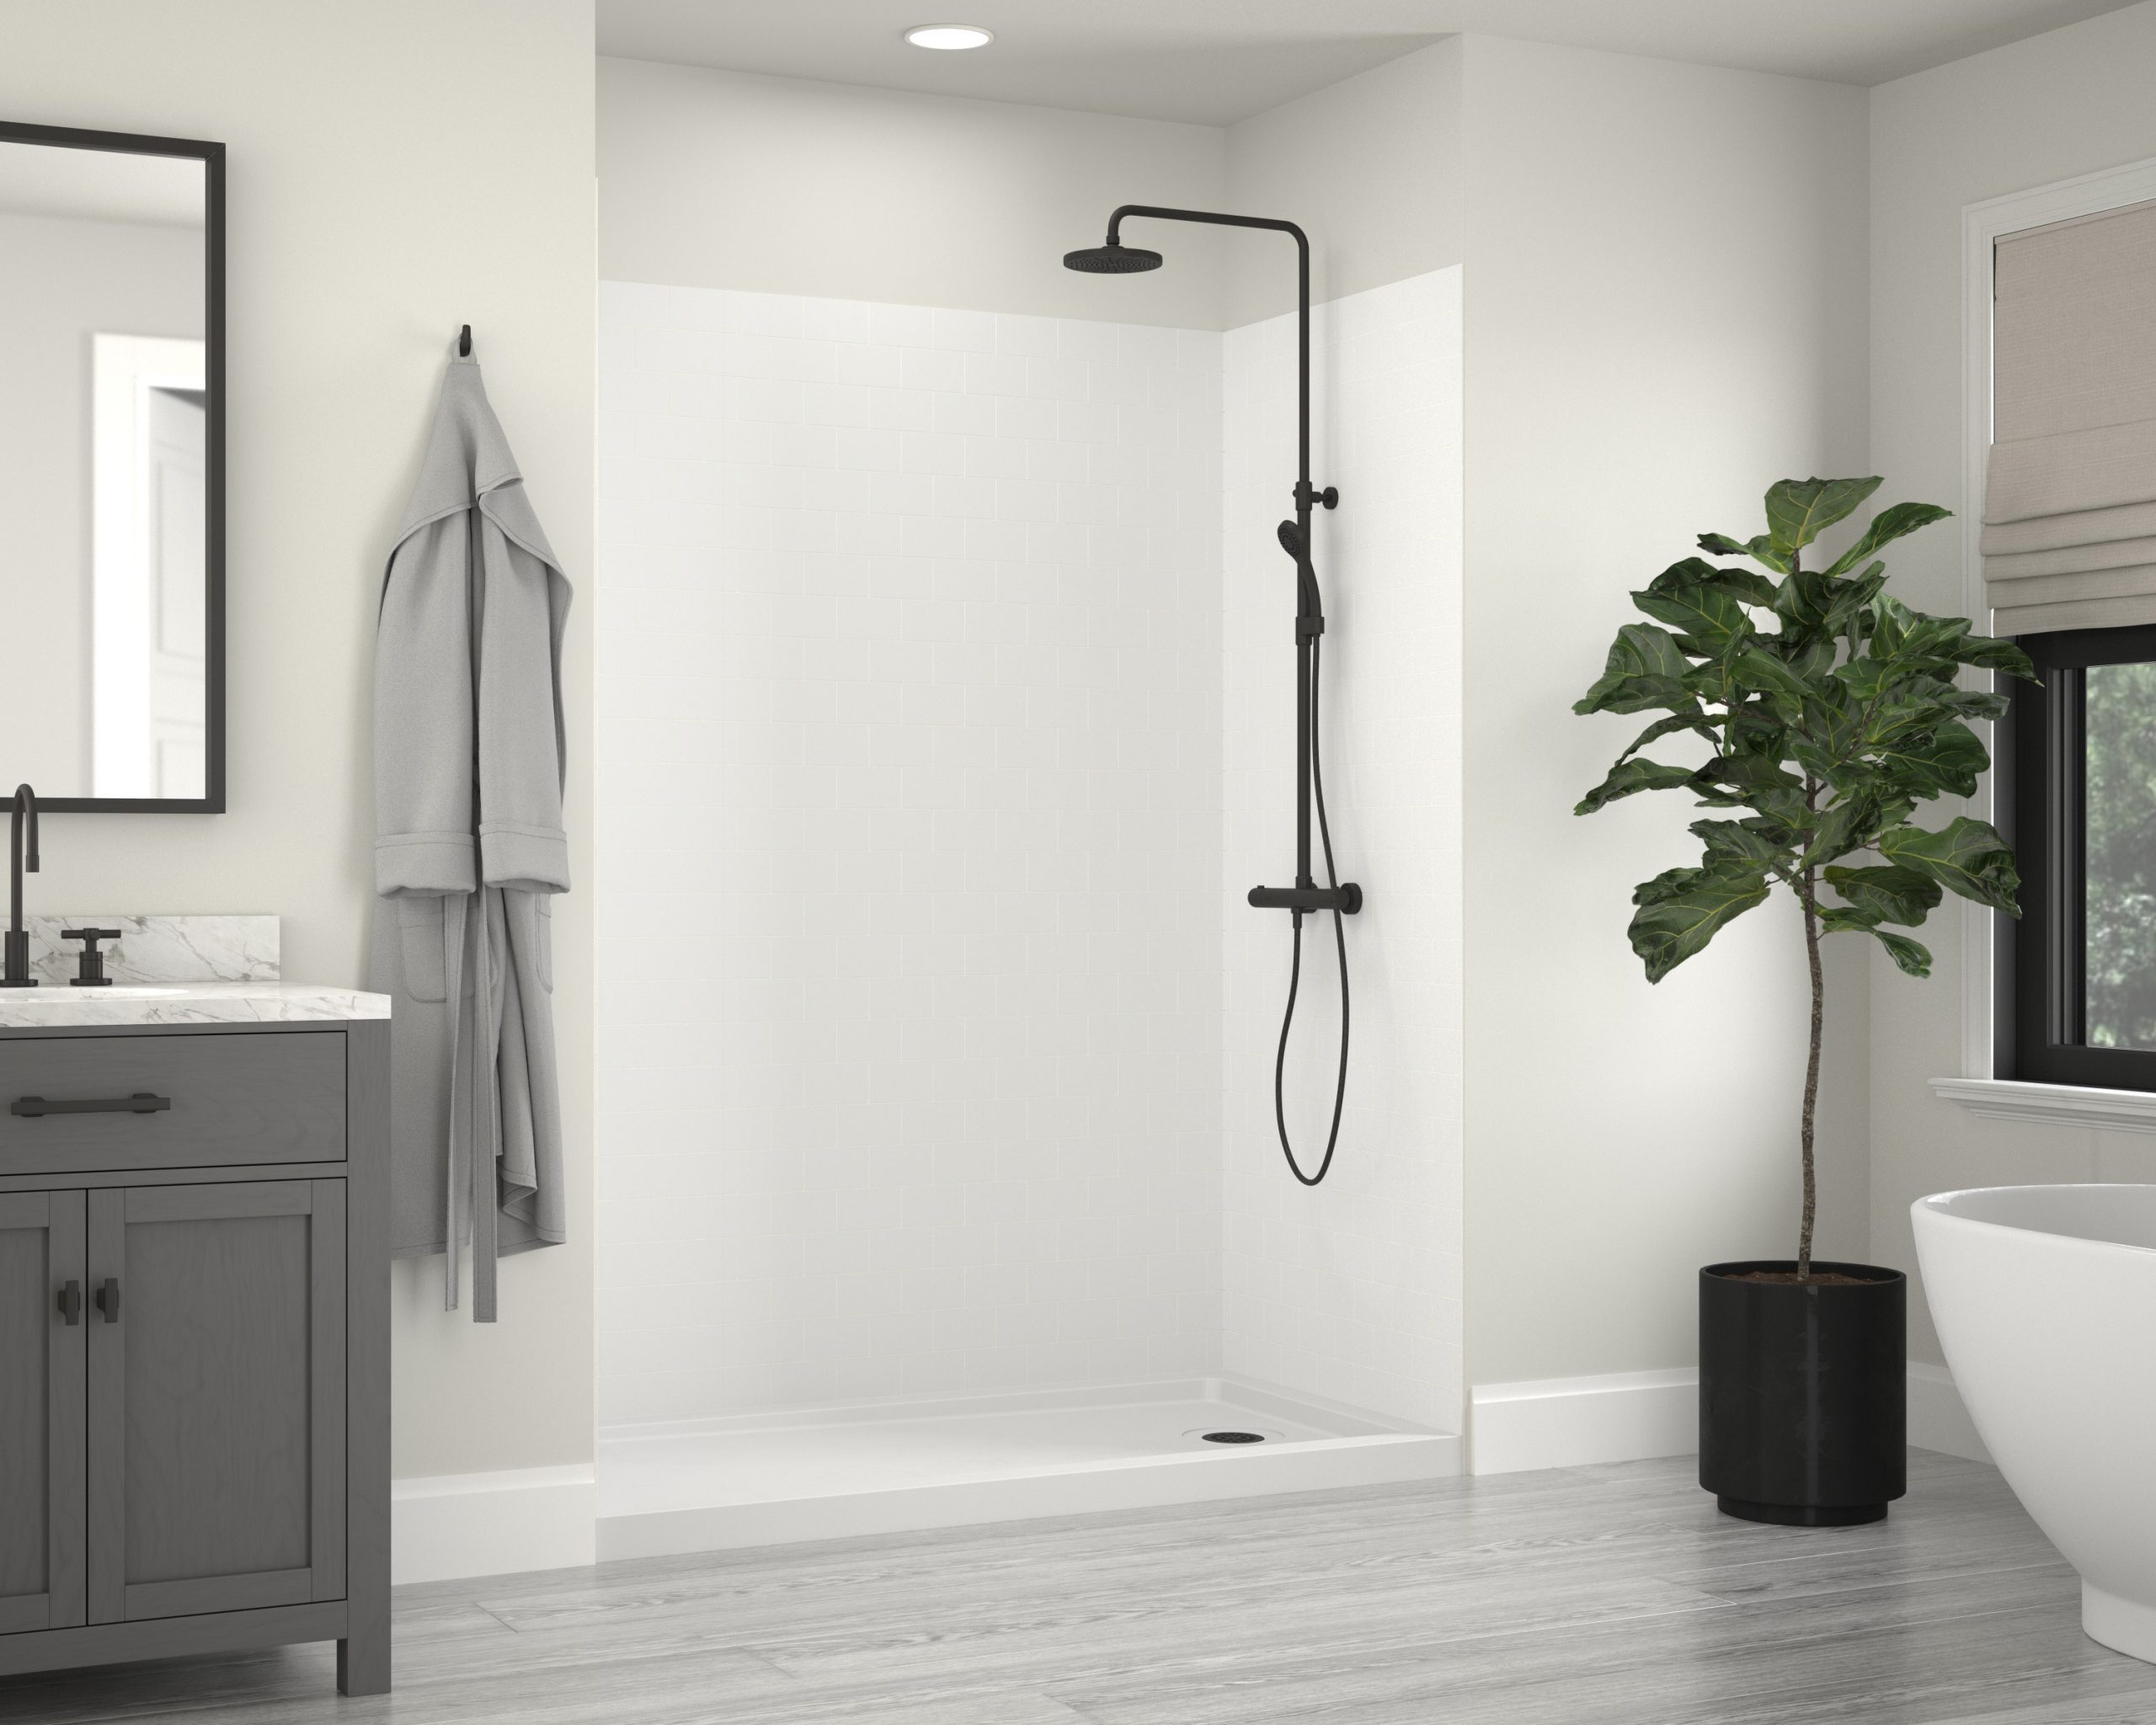 Jetcoat® 60 x 32 x 78 Five Panel Shower Wall System - CRAFT + MAIN